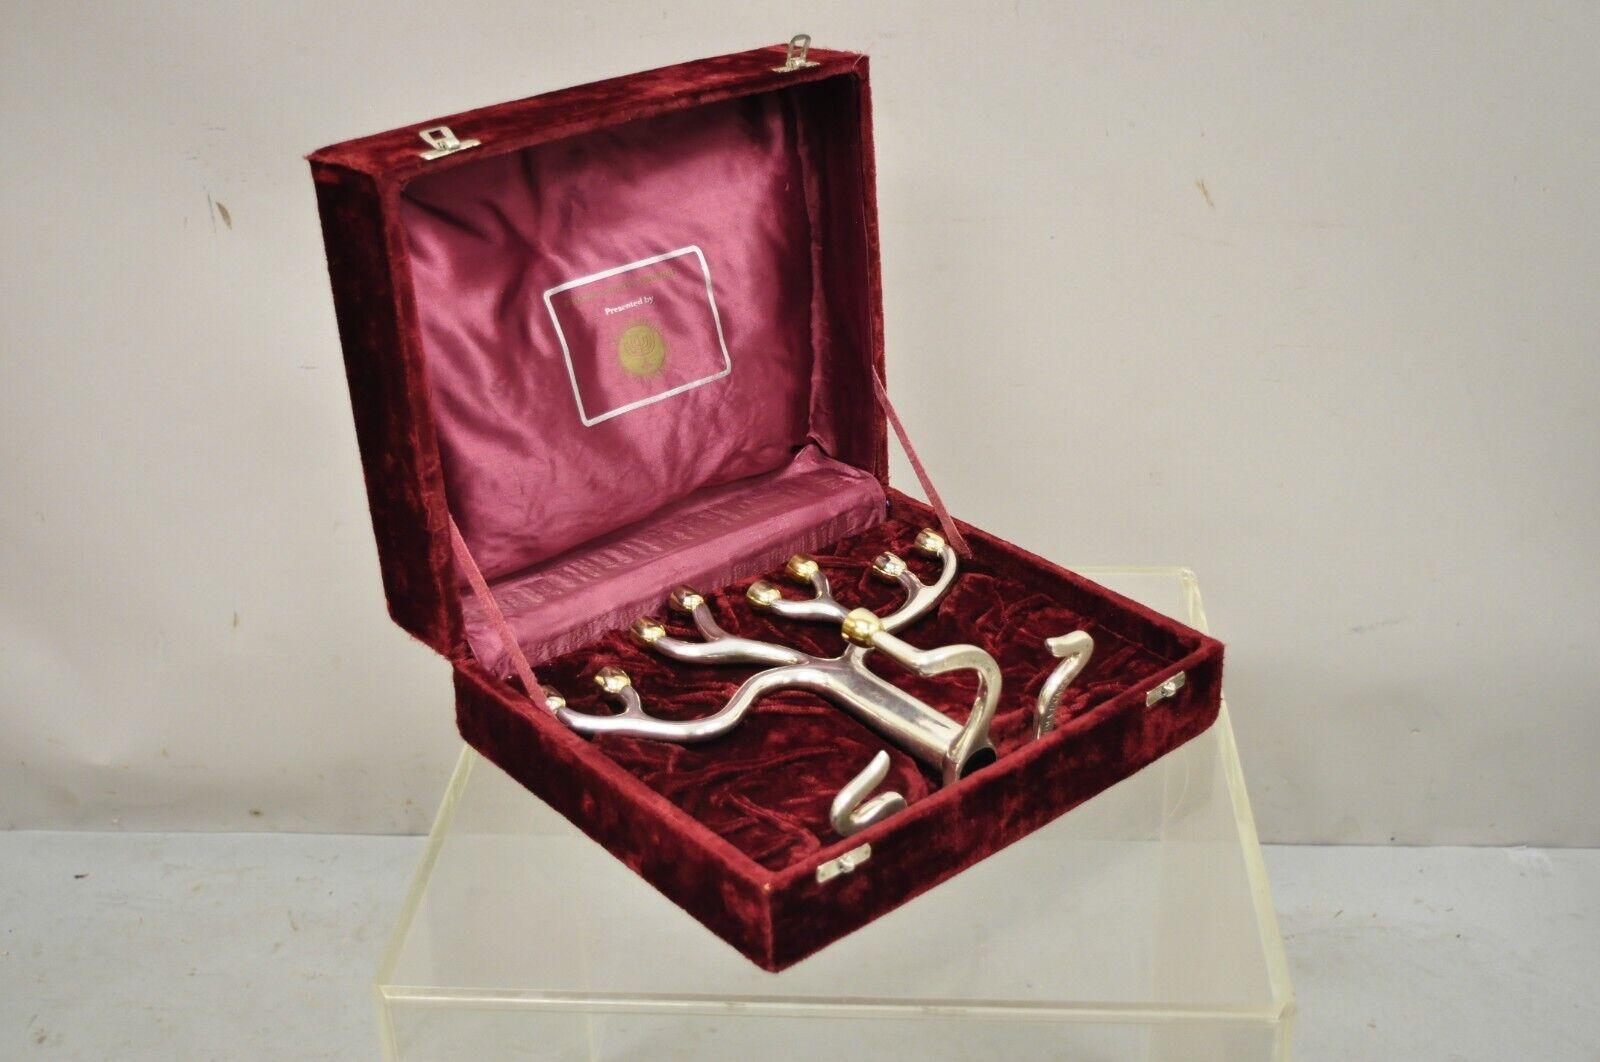 Sandra Kravitz for Rosenthal silver plate tree of life Judaica candlestick. Item features original box, original labels, clean modernist lines, quality American craftsmanship.Circa late 20th century. Measurements: 9